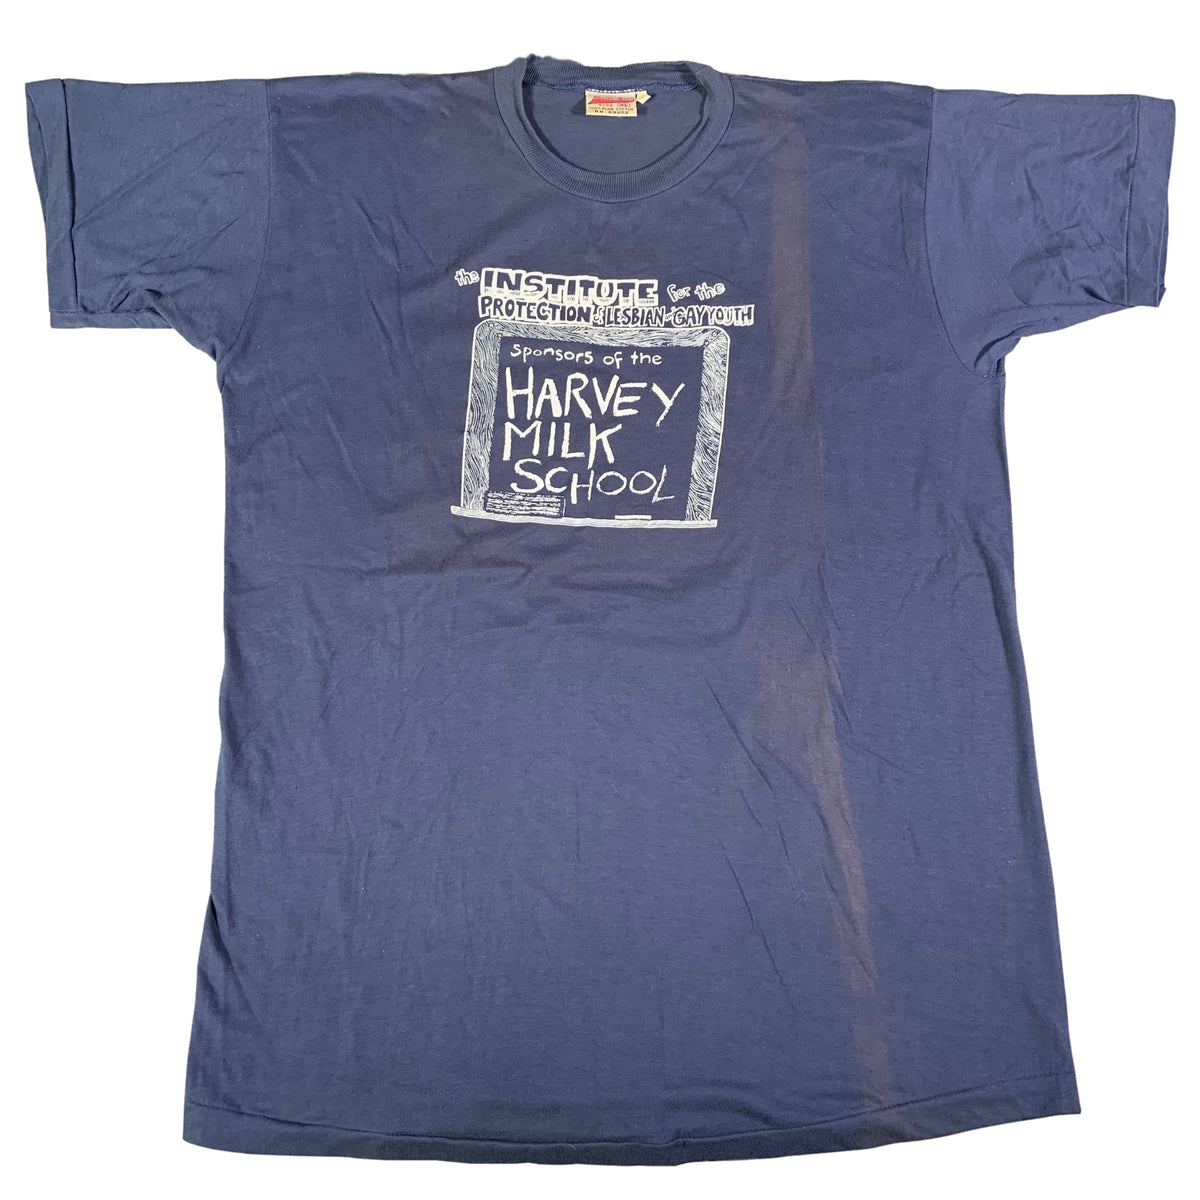 Vintage Harvey Milk &quot;Institute Of The Protection Of Lesbian &amp; Gay Youth&quot; T-Shirt - jointcustodydc